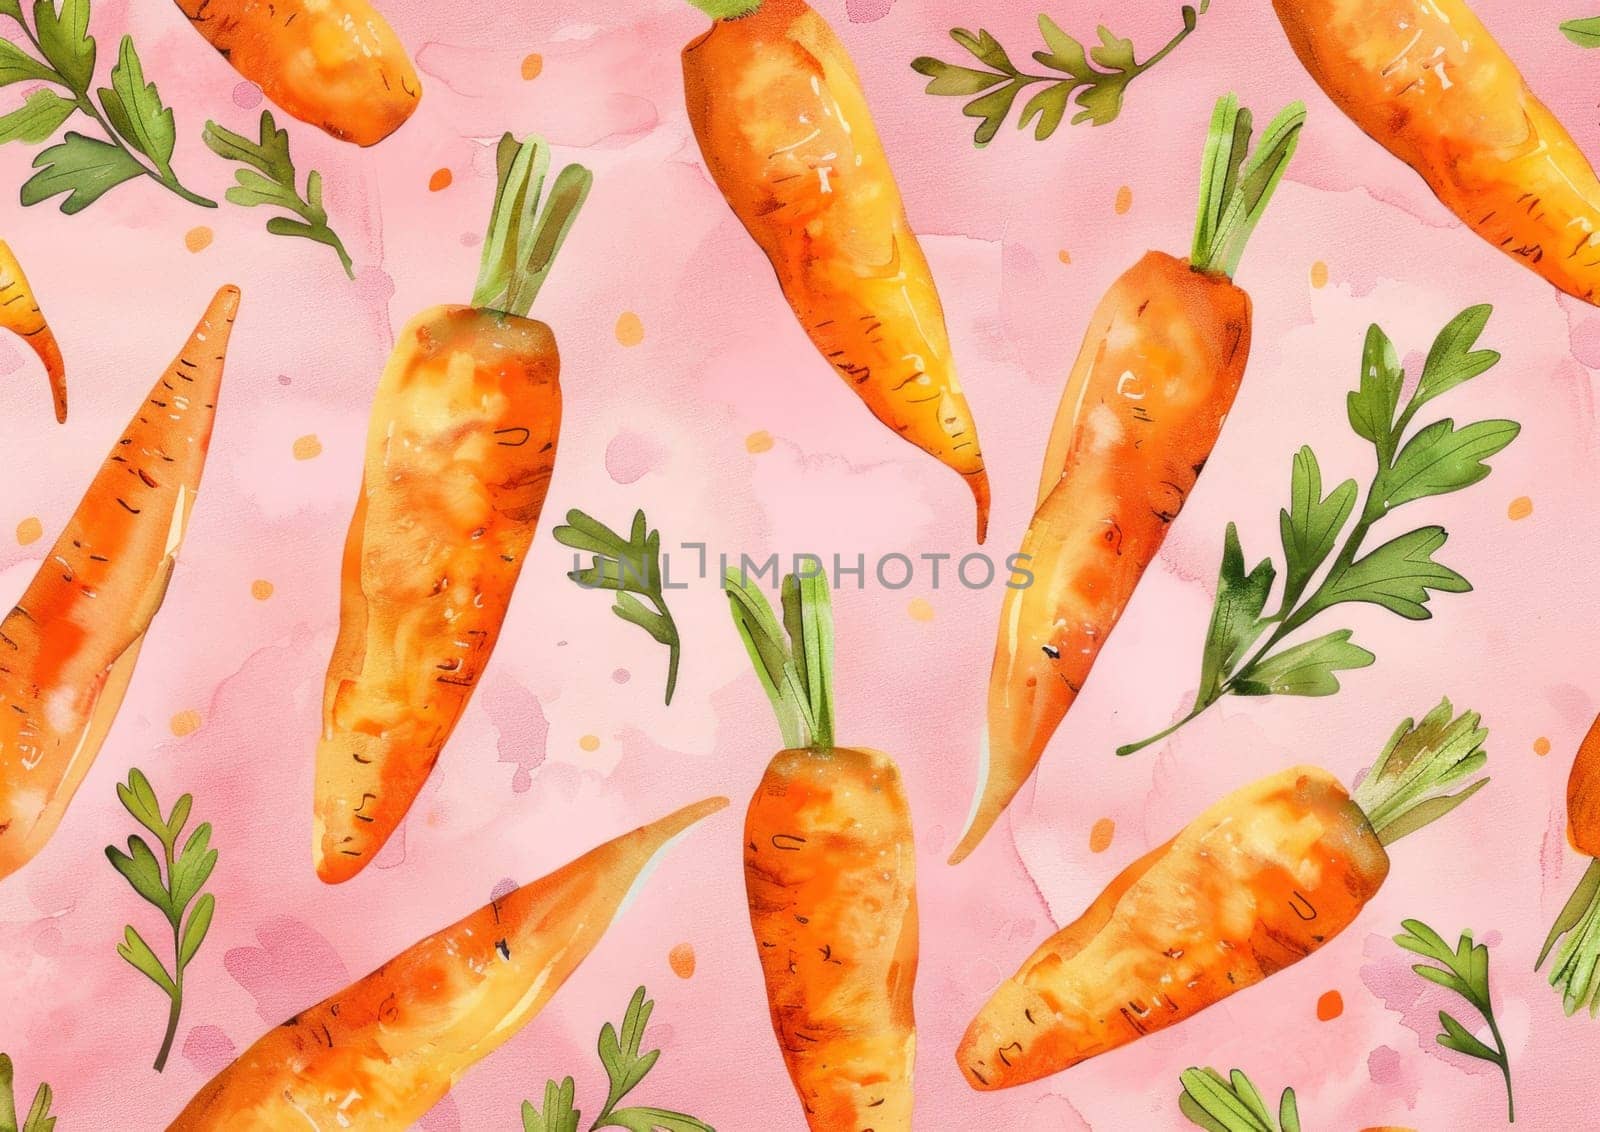 Carrots on pink background watercolor seamless pattern illustration perfect for kitchen decor and food related projects